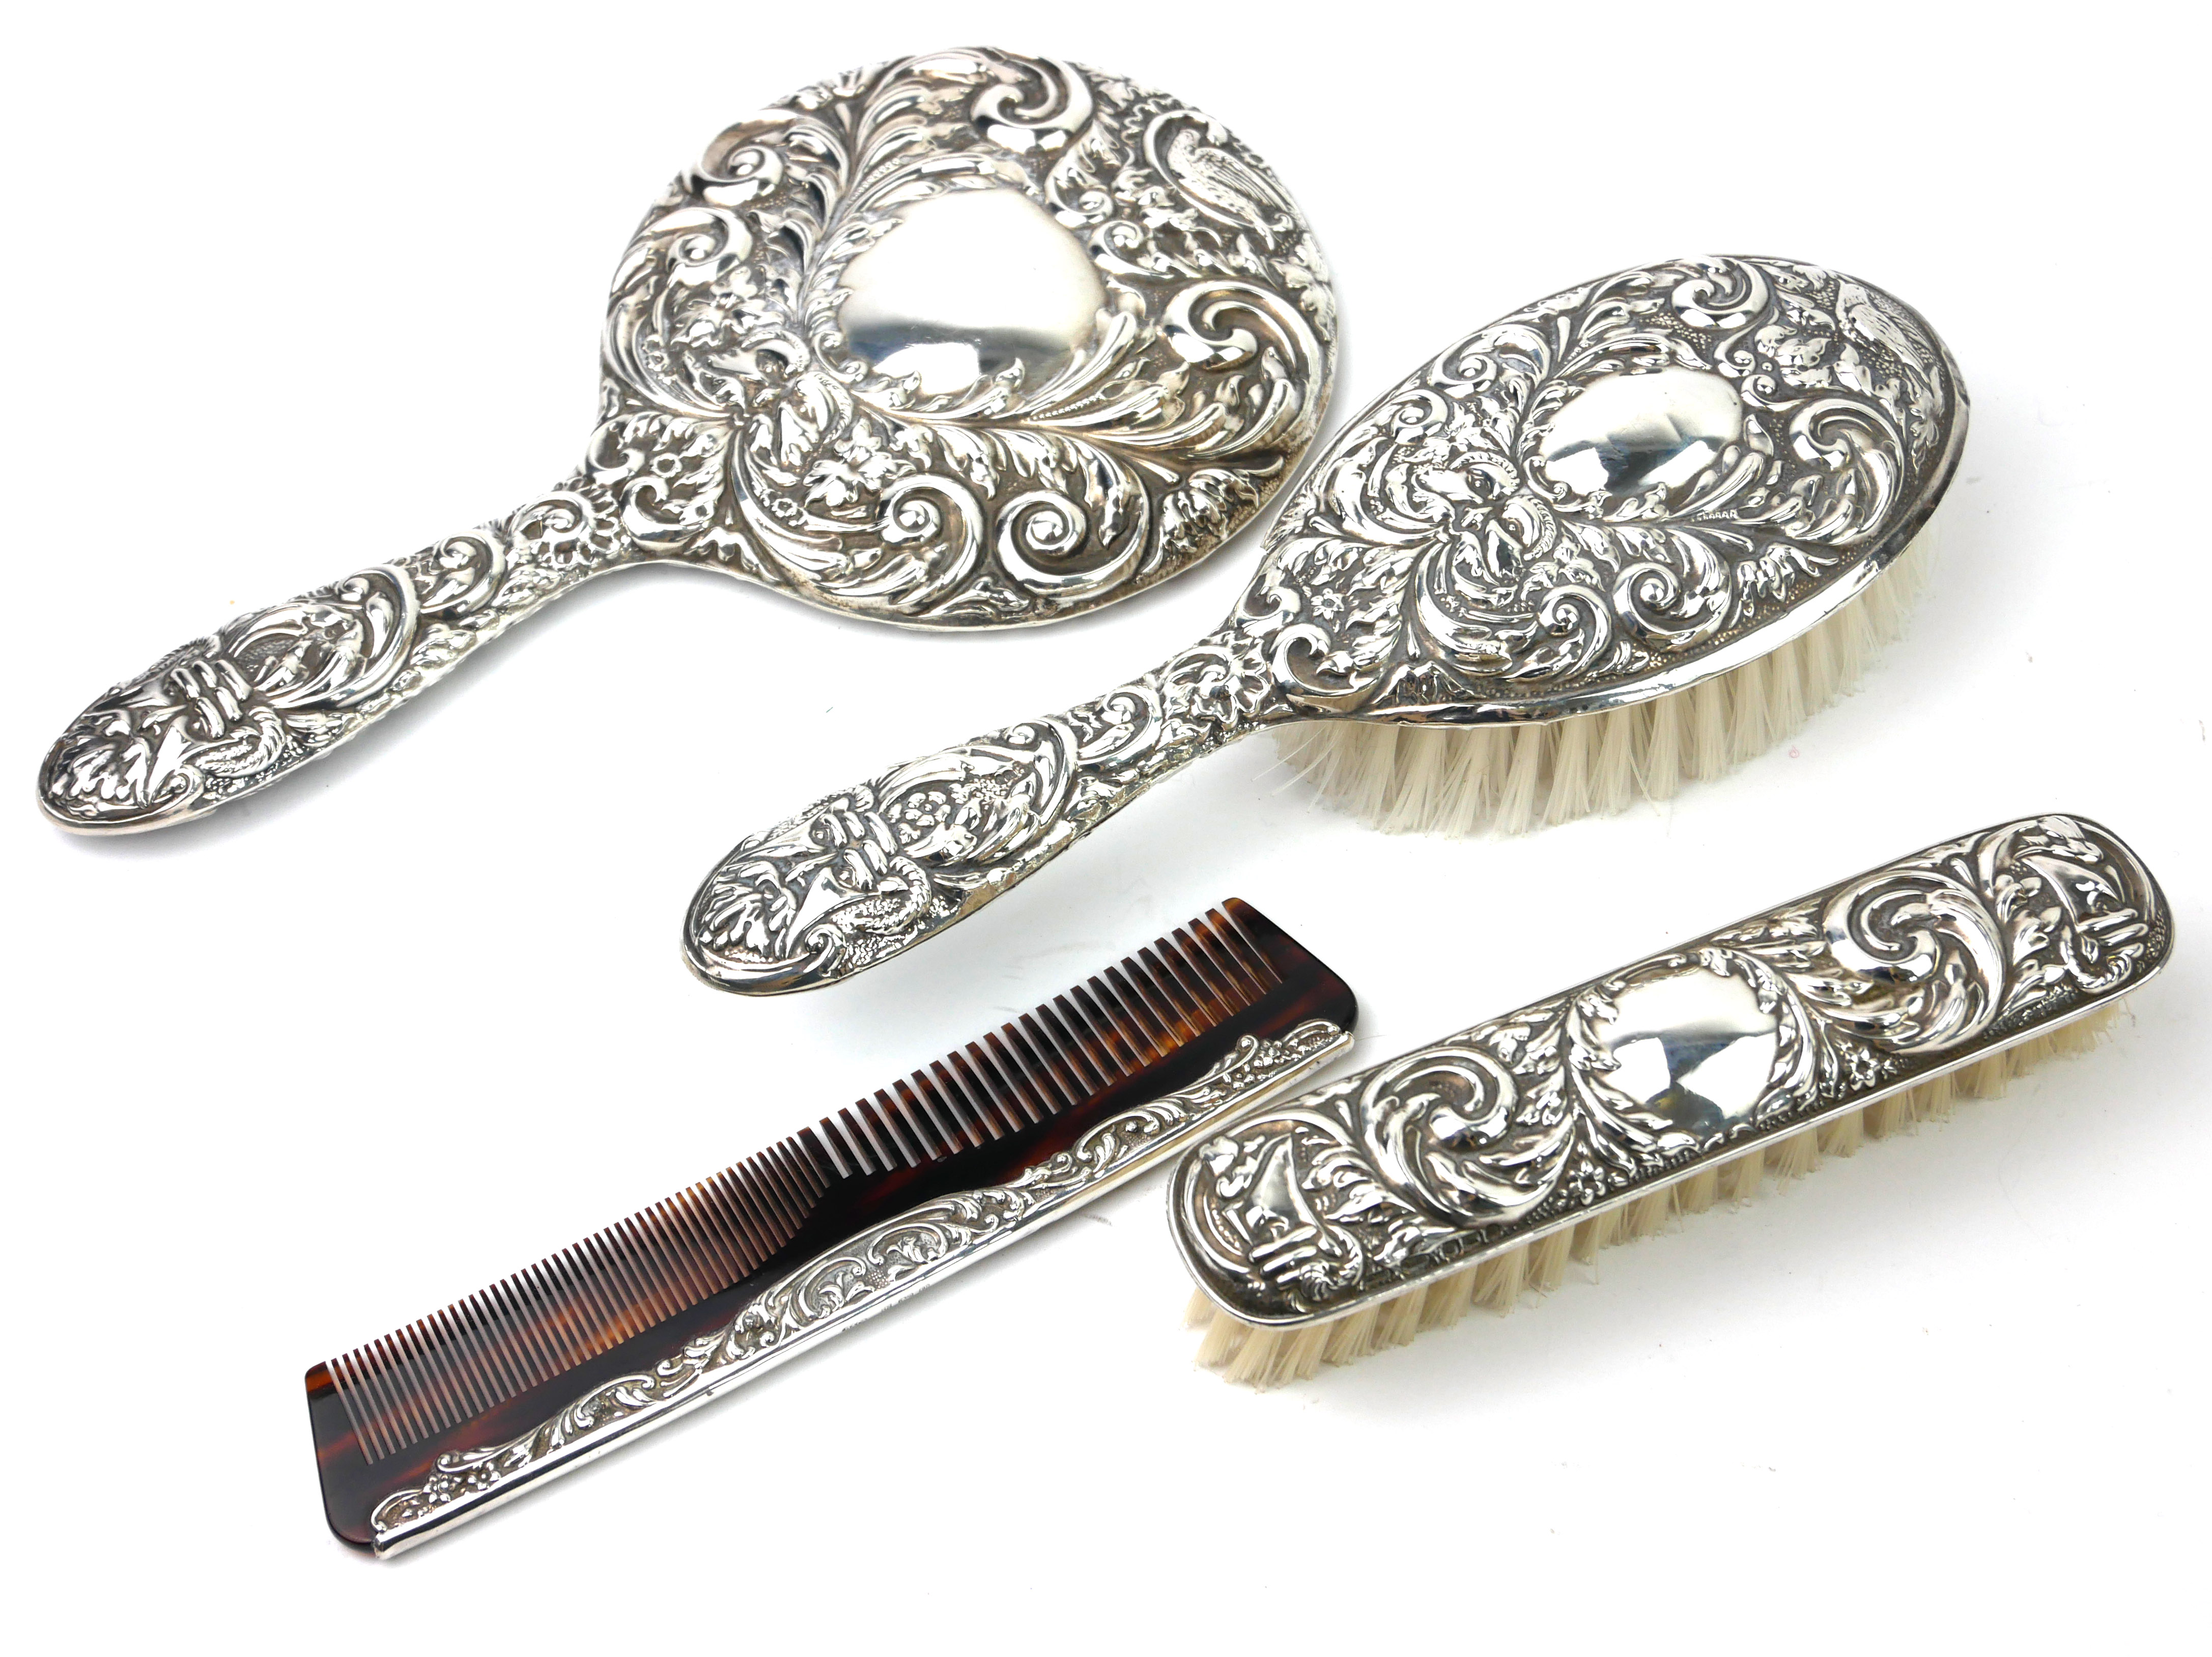 A 20TH CENTURY STERLING SILVER VANITY SET Comprising a hand mirror, hairbrush, tortoiseshell comb